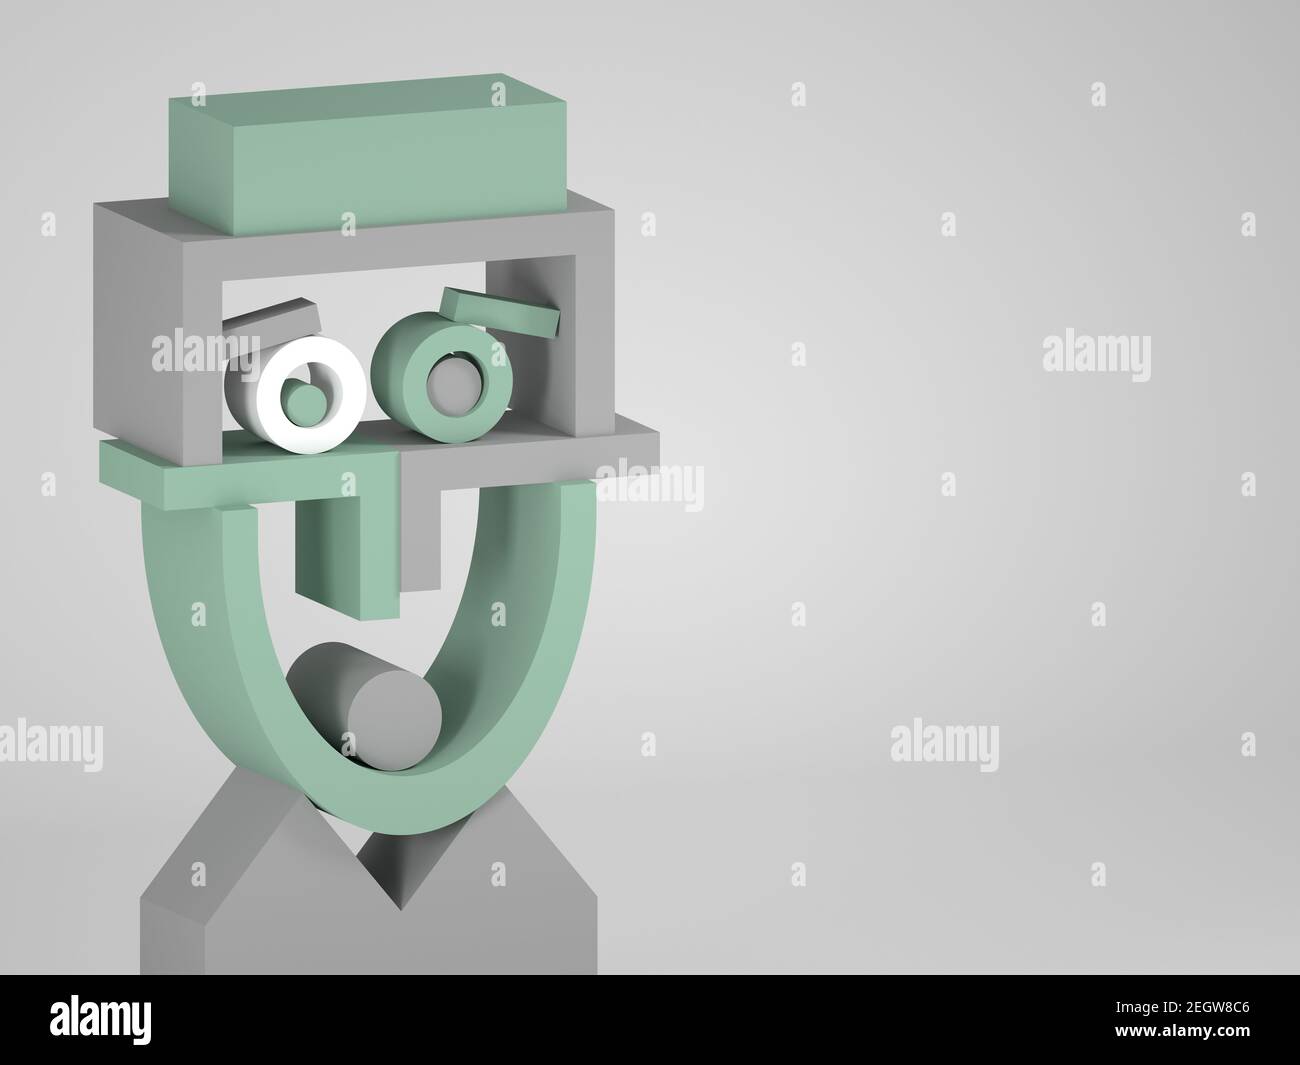 Surreal confused face, geometric installation. Abstract equilibrium still life with gray, green and white primitive shapes. 3d rendering illustration Stock Photo